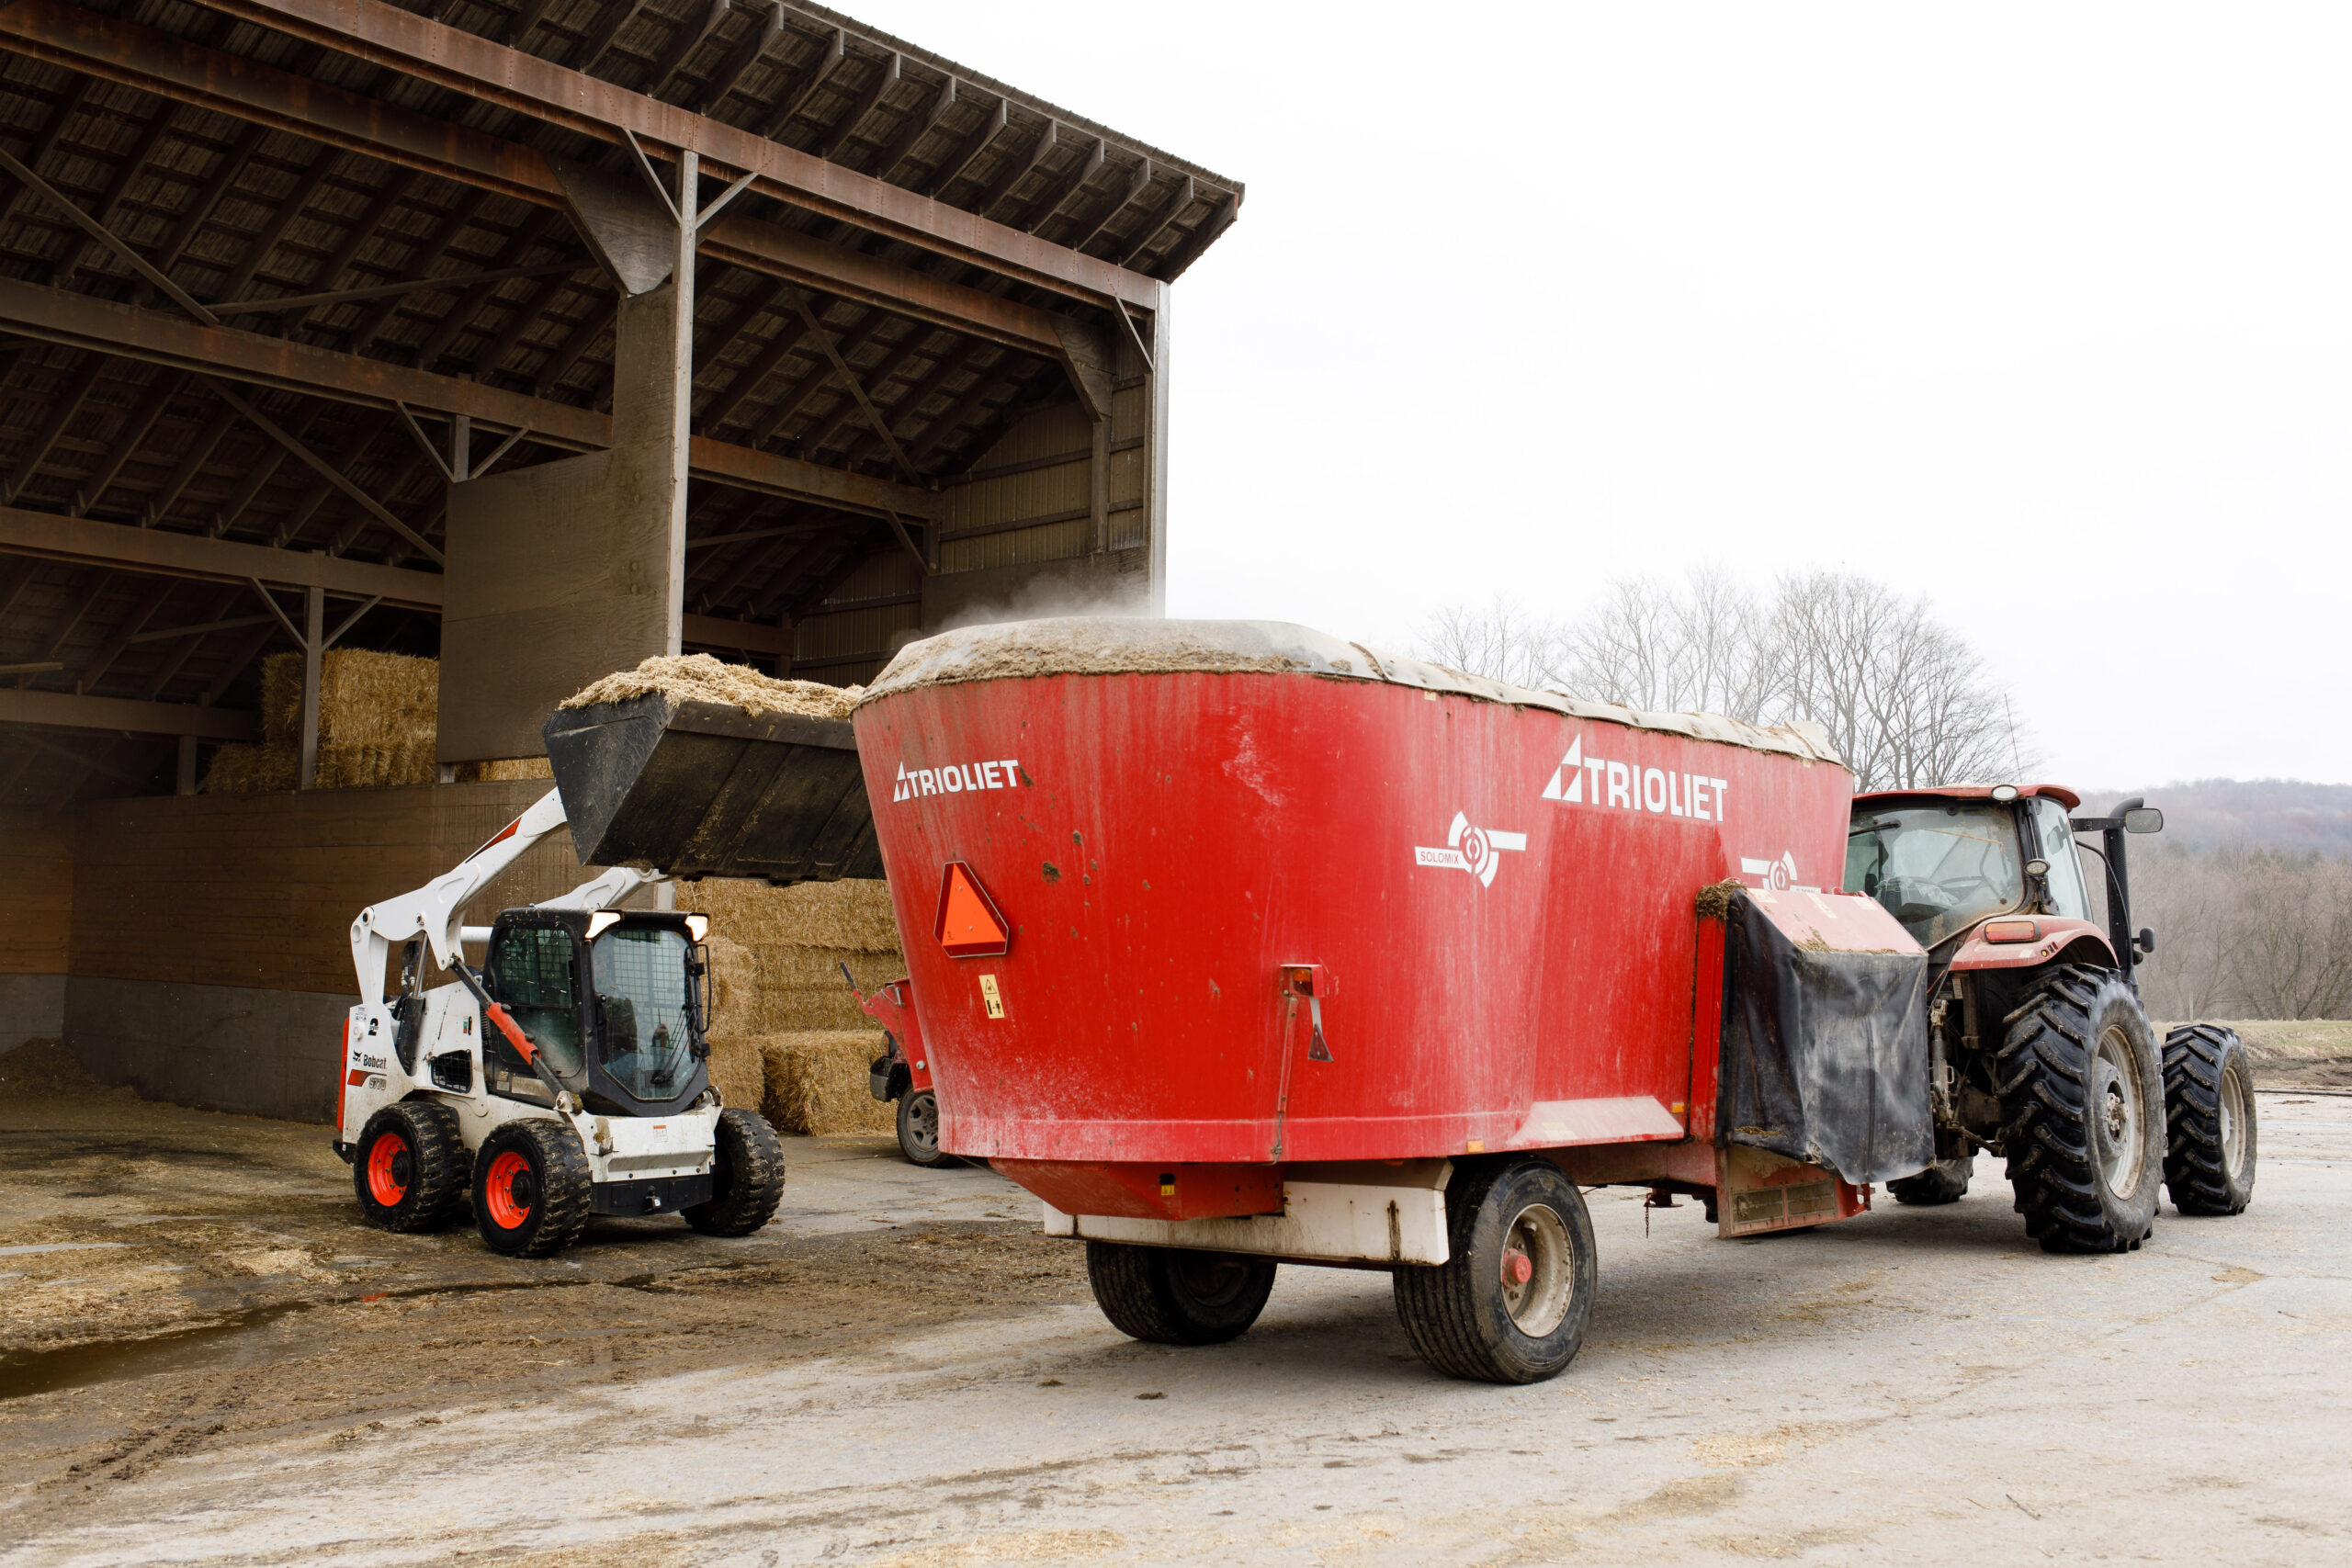 A machine loads TMR feed, for dairy cows, into a red trailer being pulled by a tractor next to a food shed.